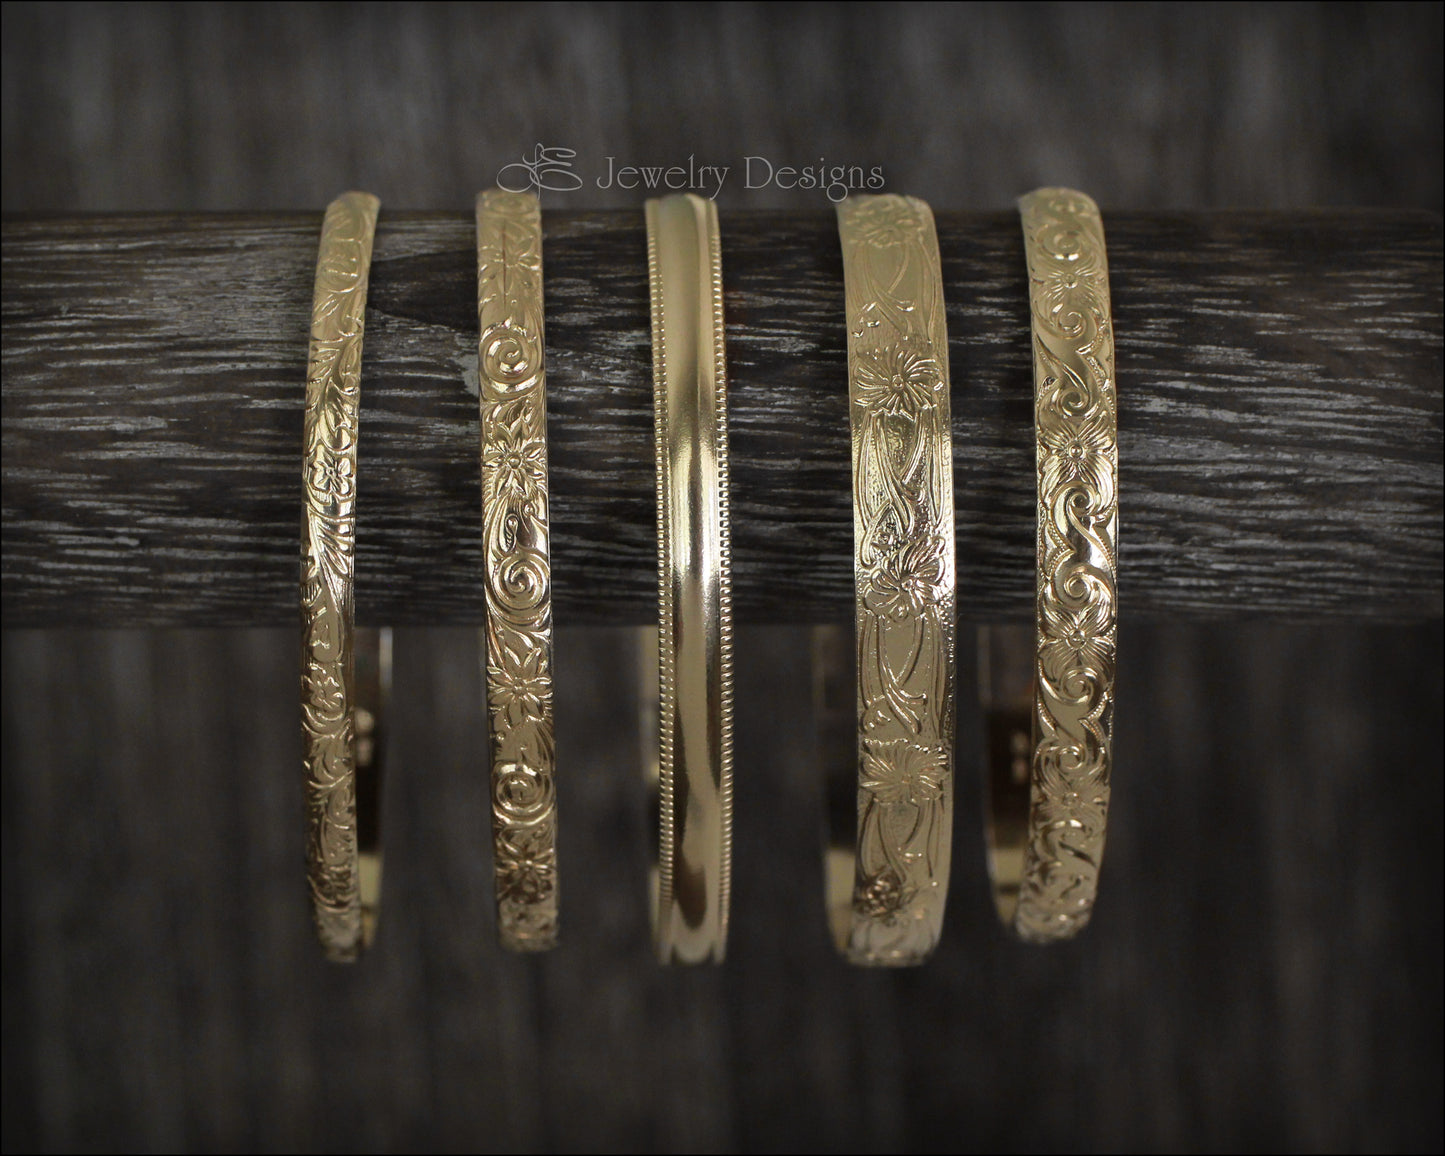 Load image into Gallery viewer, Gold-Filled Pattern Cuff Bracelets - LE Jewelry Designs
